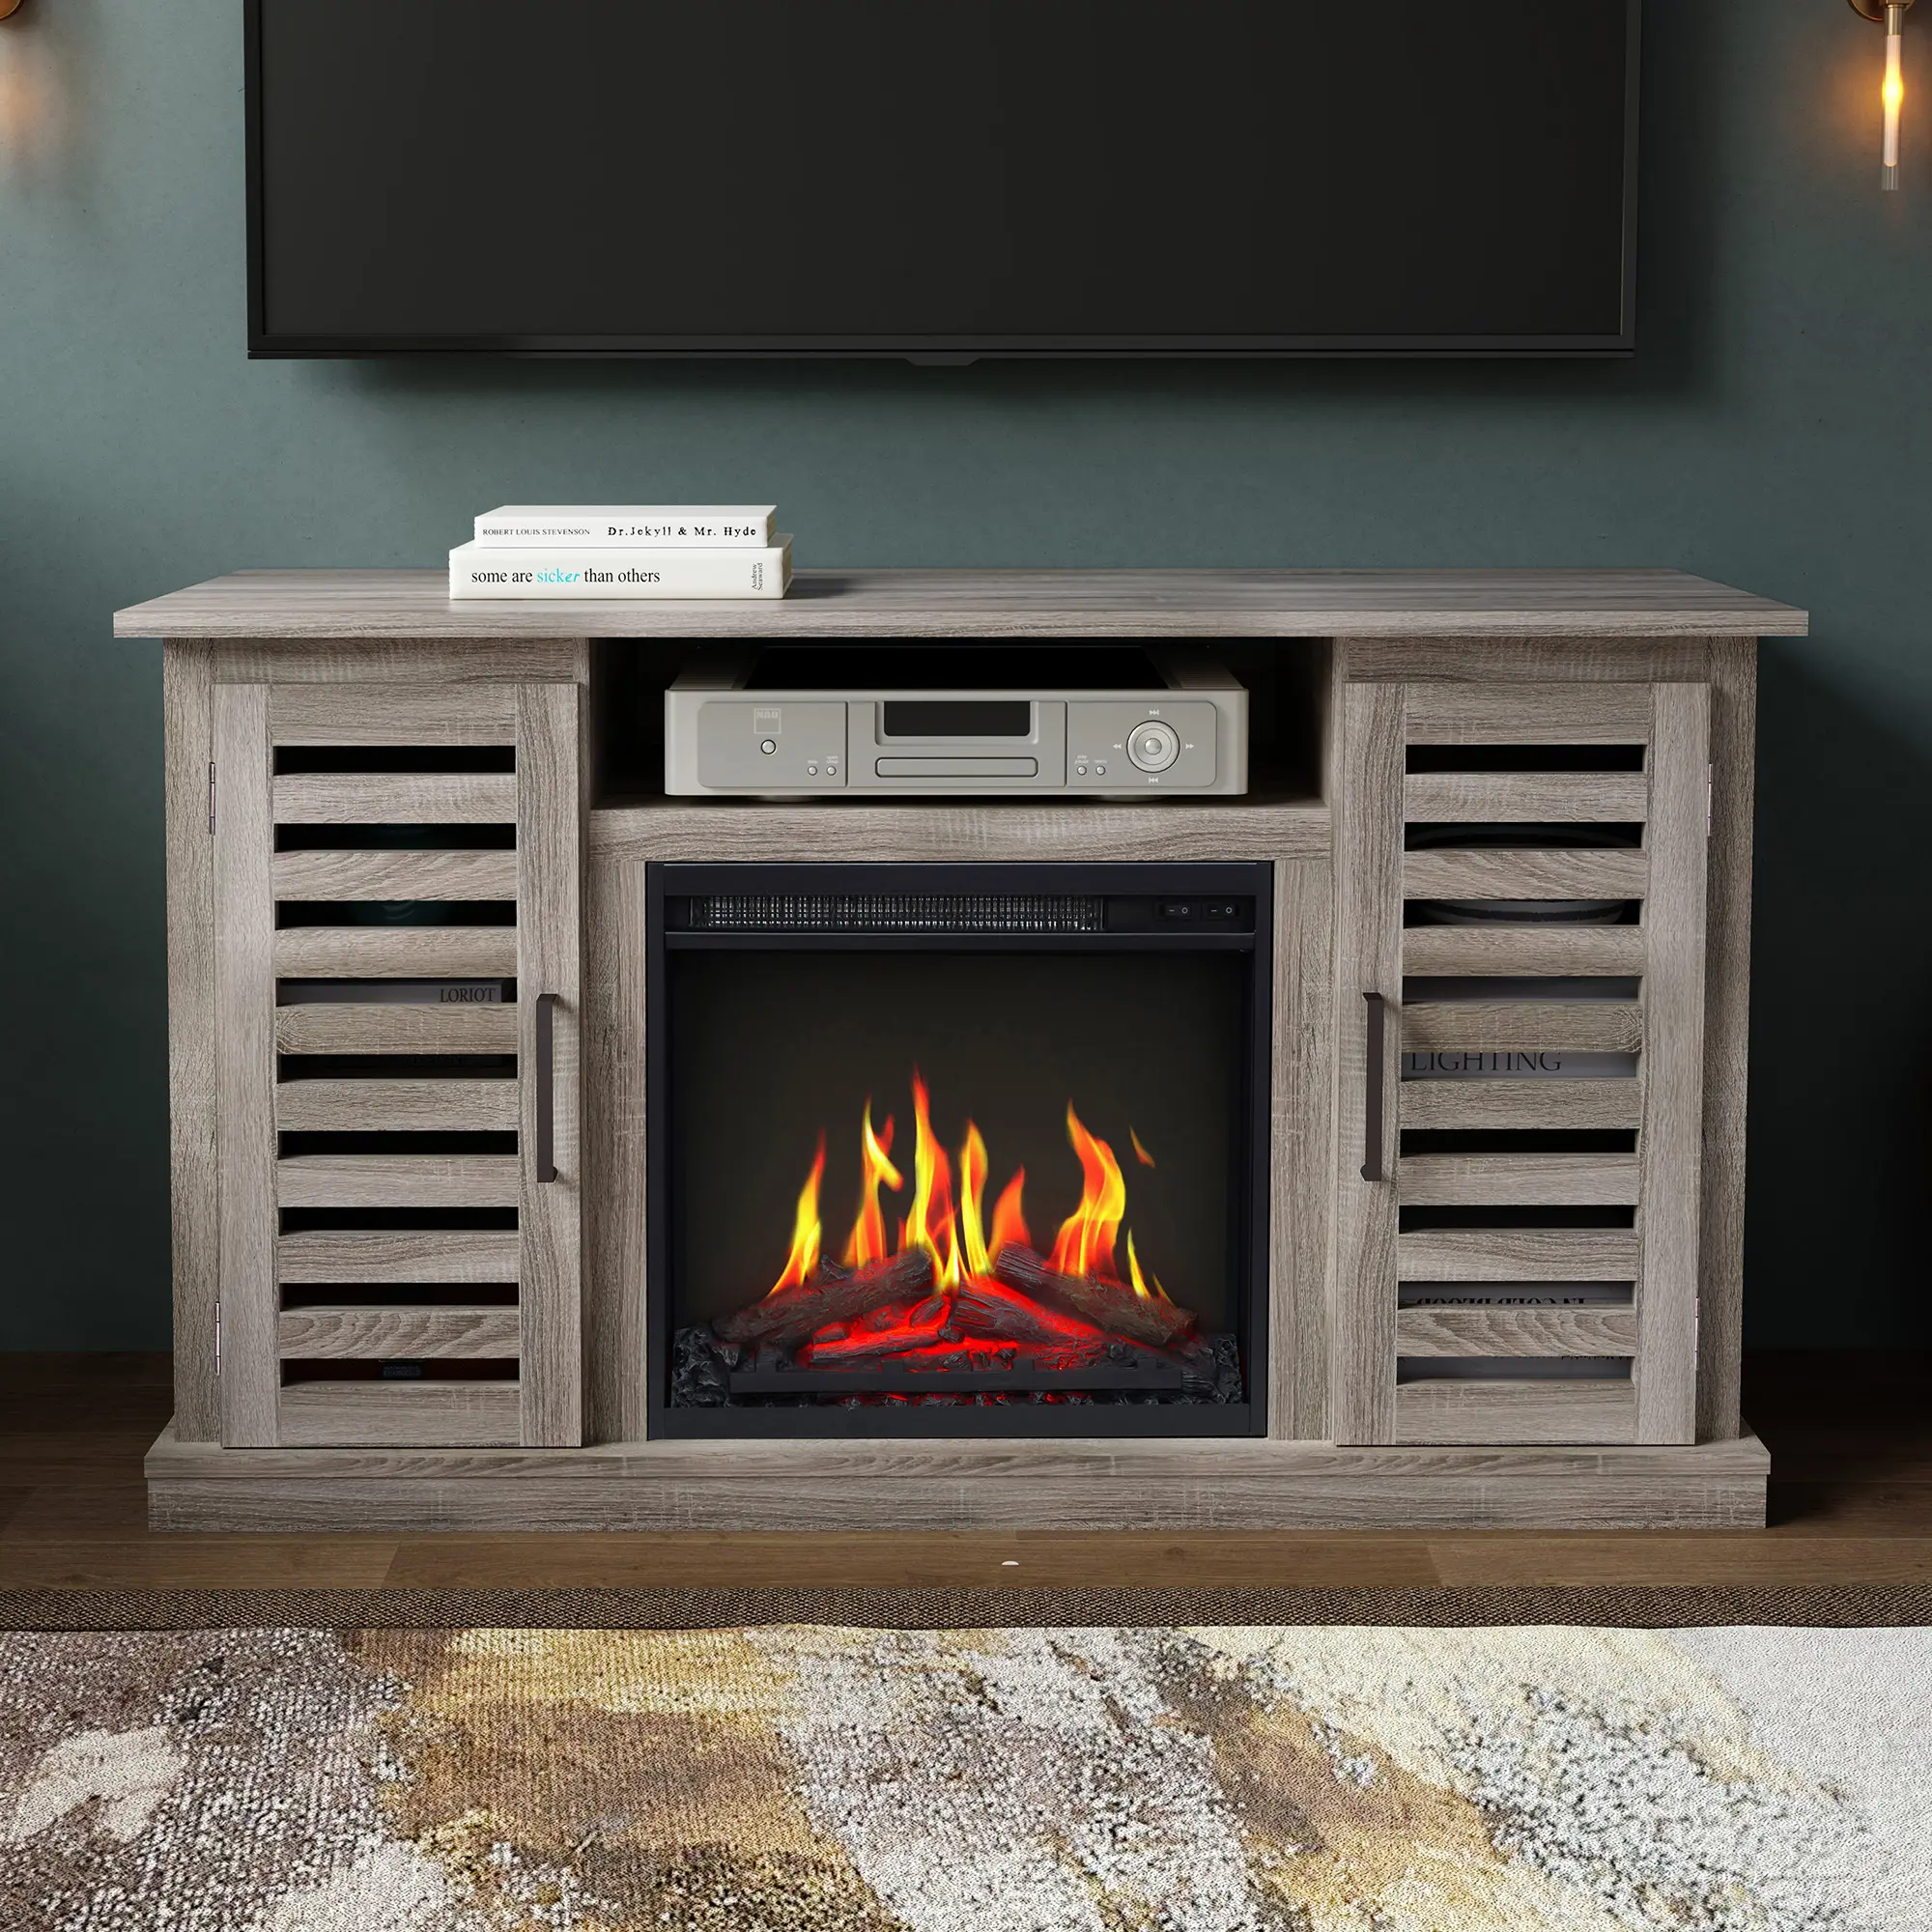 Luxstar Mueble tv con chimenea tv stand with fireplace plau led light 32/49/55 inch tv stand with electric fireplace